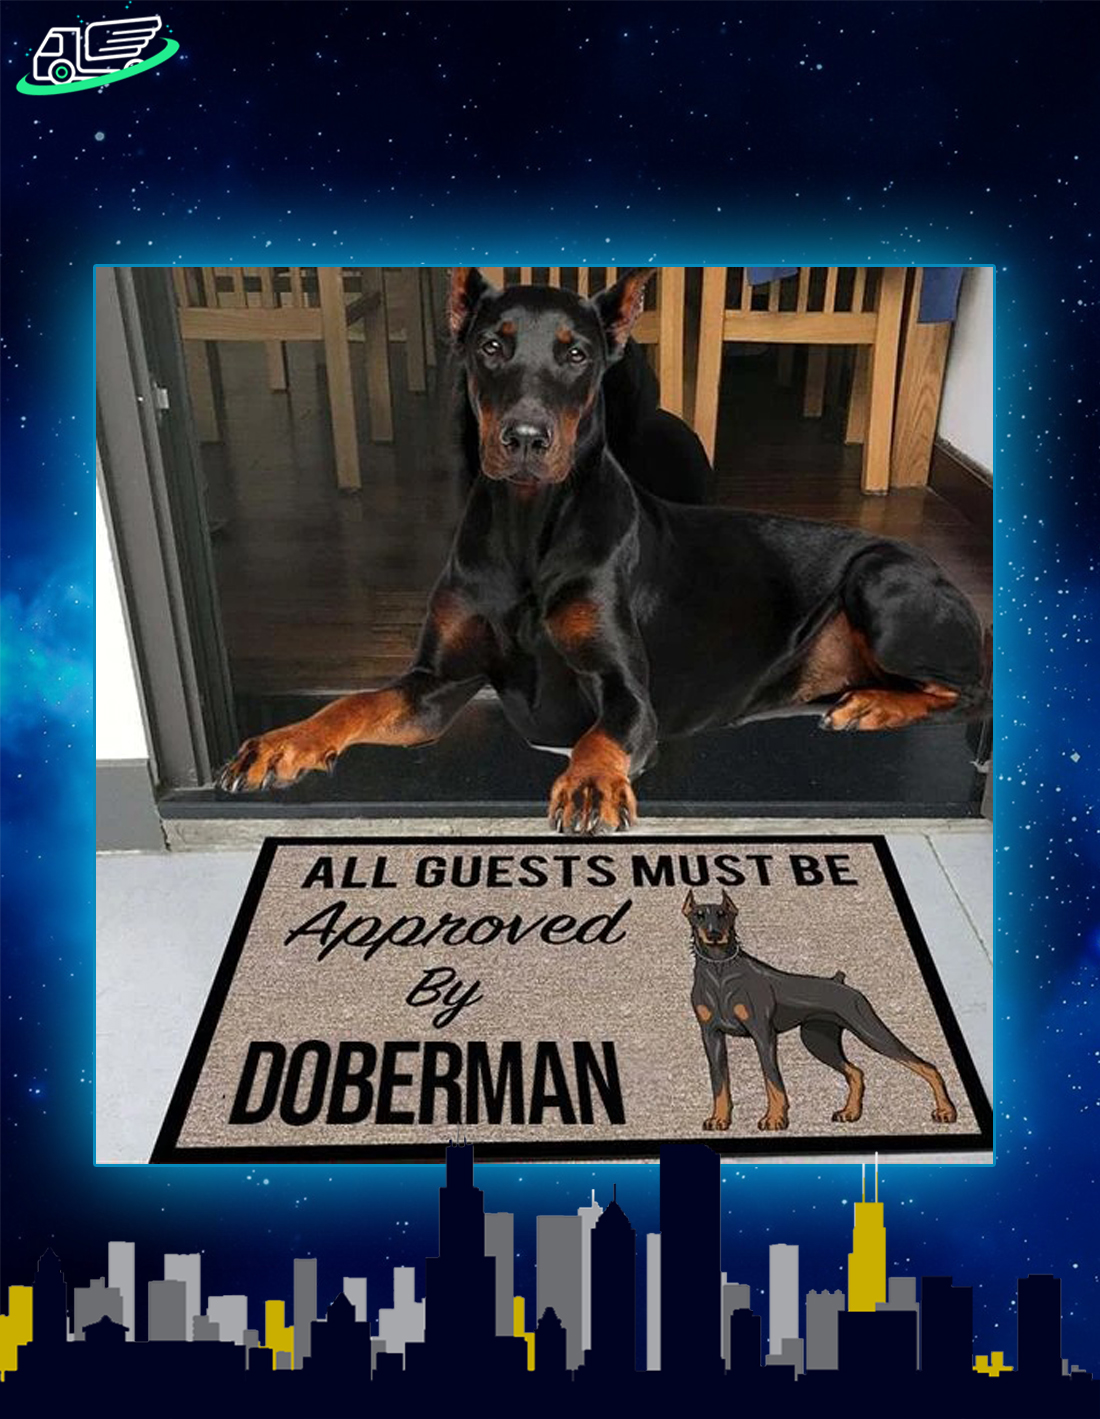 All guests must be approved by doberman doormat